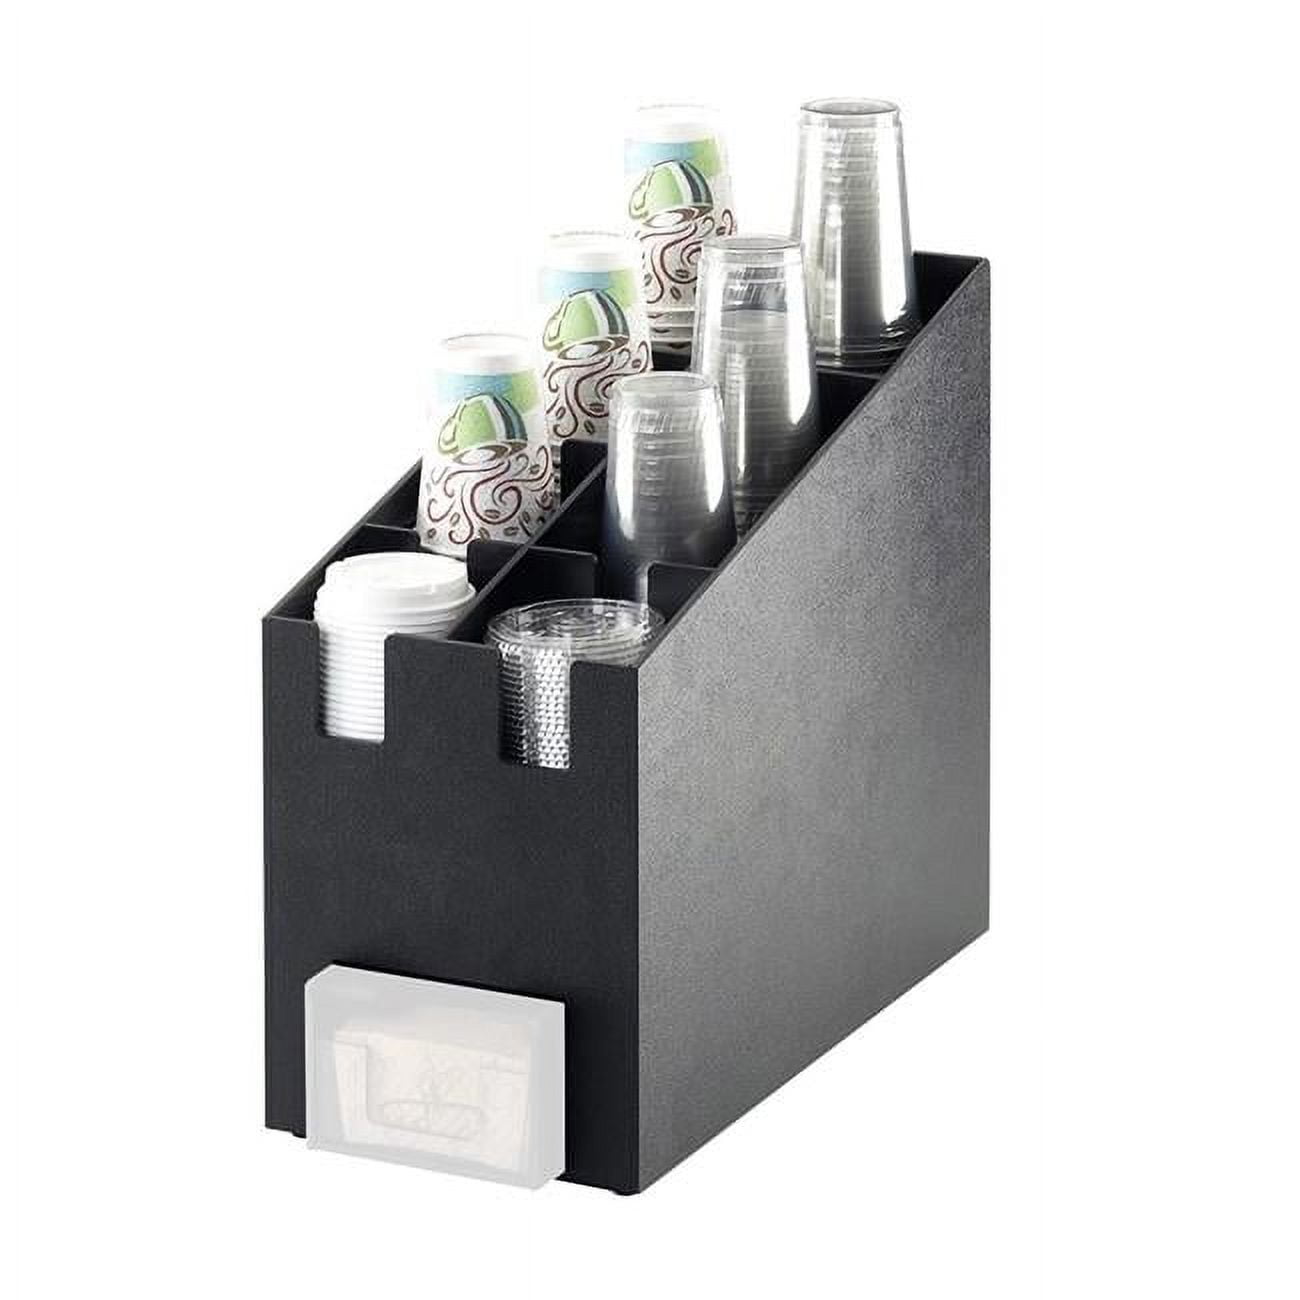 2045 Classic Cup & Lid Organizer With Java Jacket Dispenser Slot - 9.125 X 19.25 X 16.75 In.